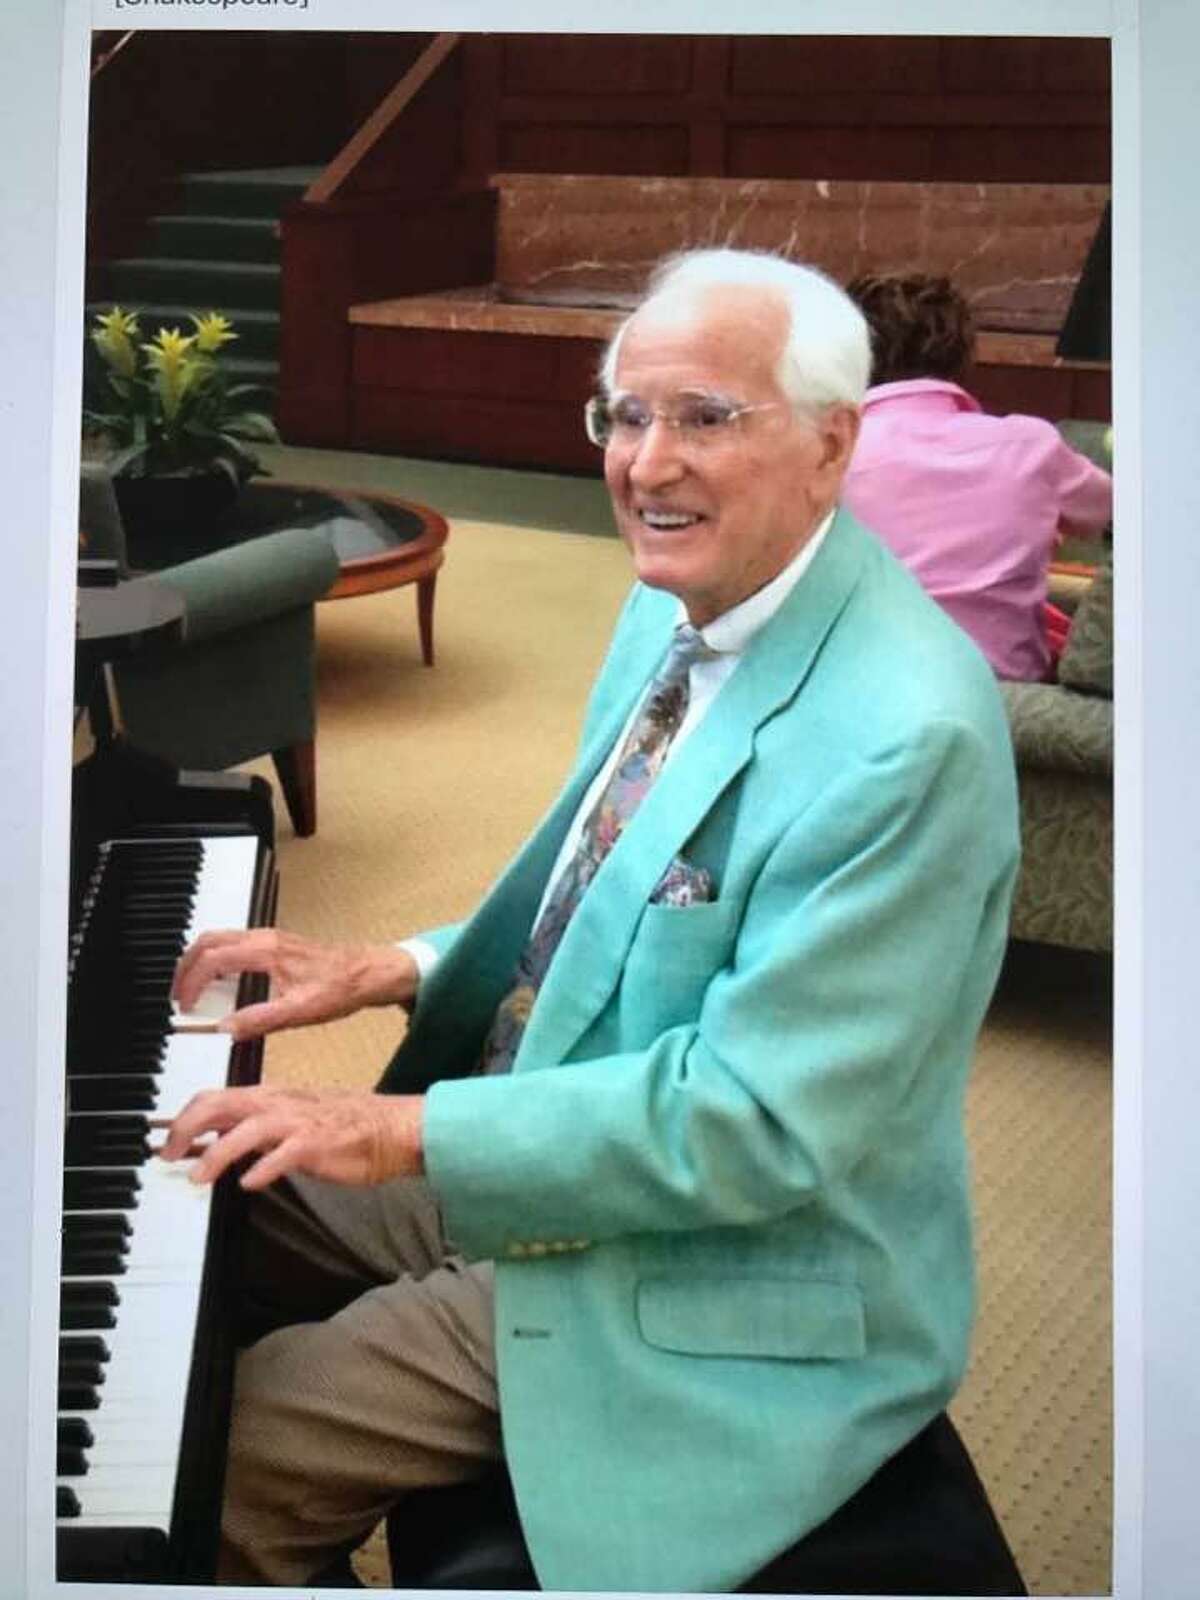 Pianist Joe “Butch” DeLuca playing The American Songbook at Greenwich Hospital’s atrium.